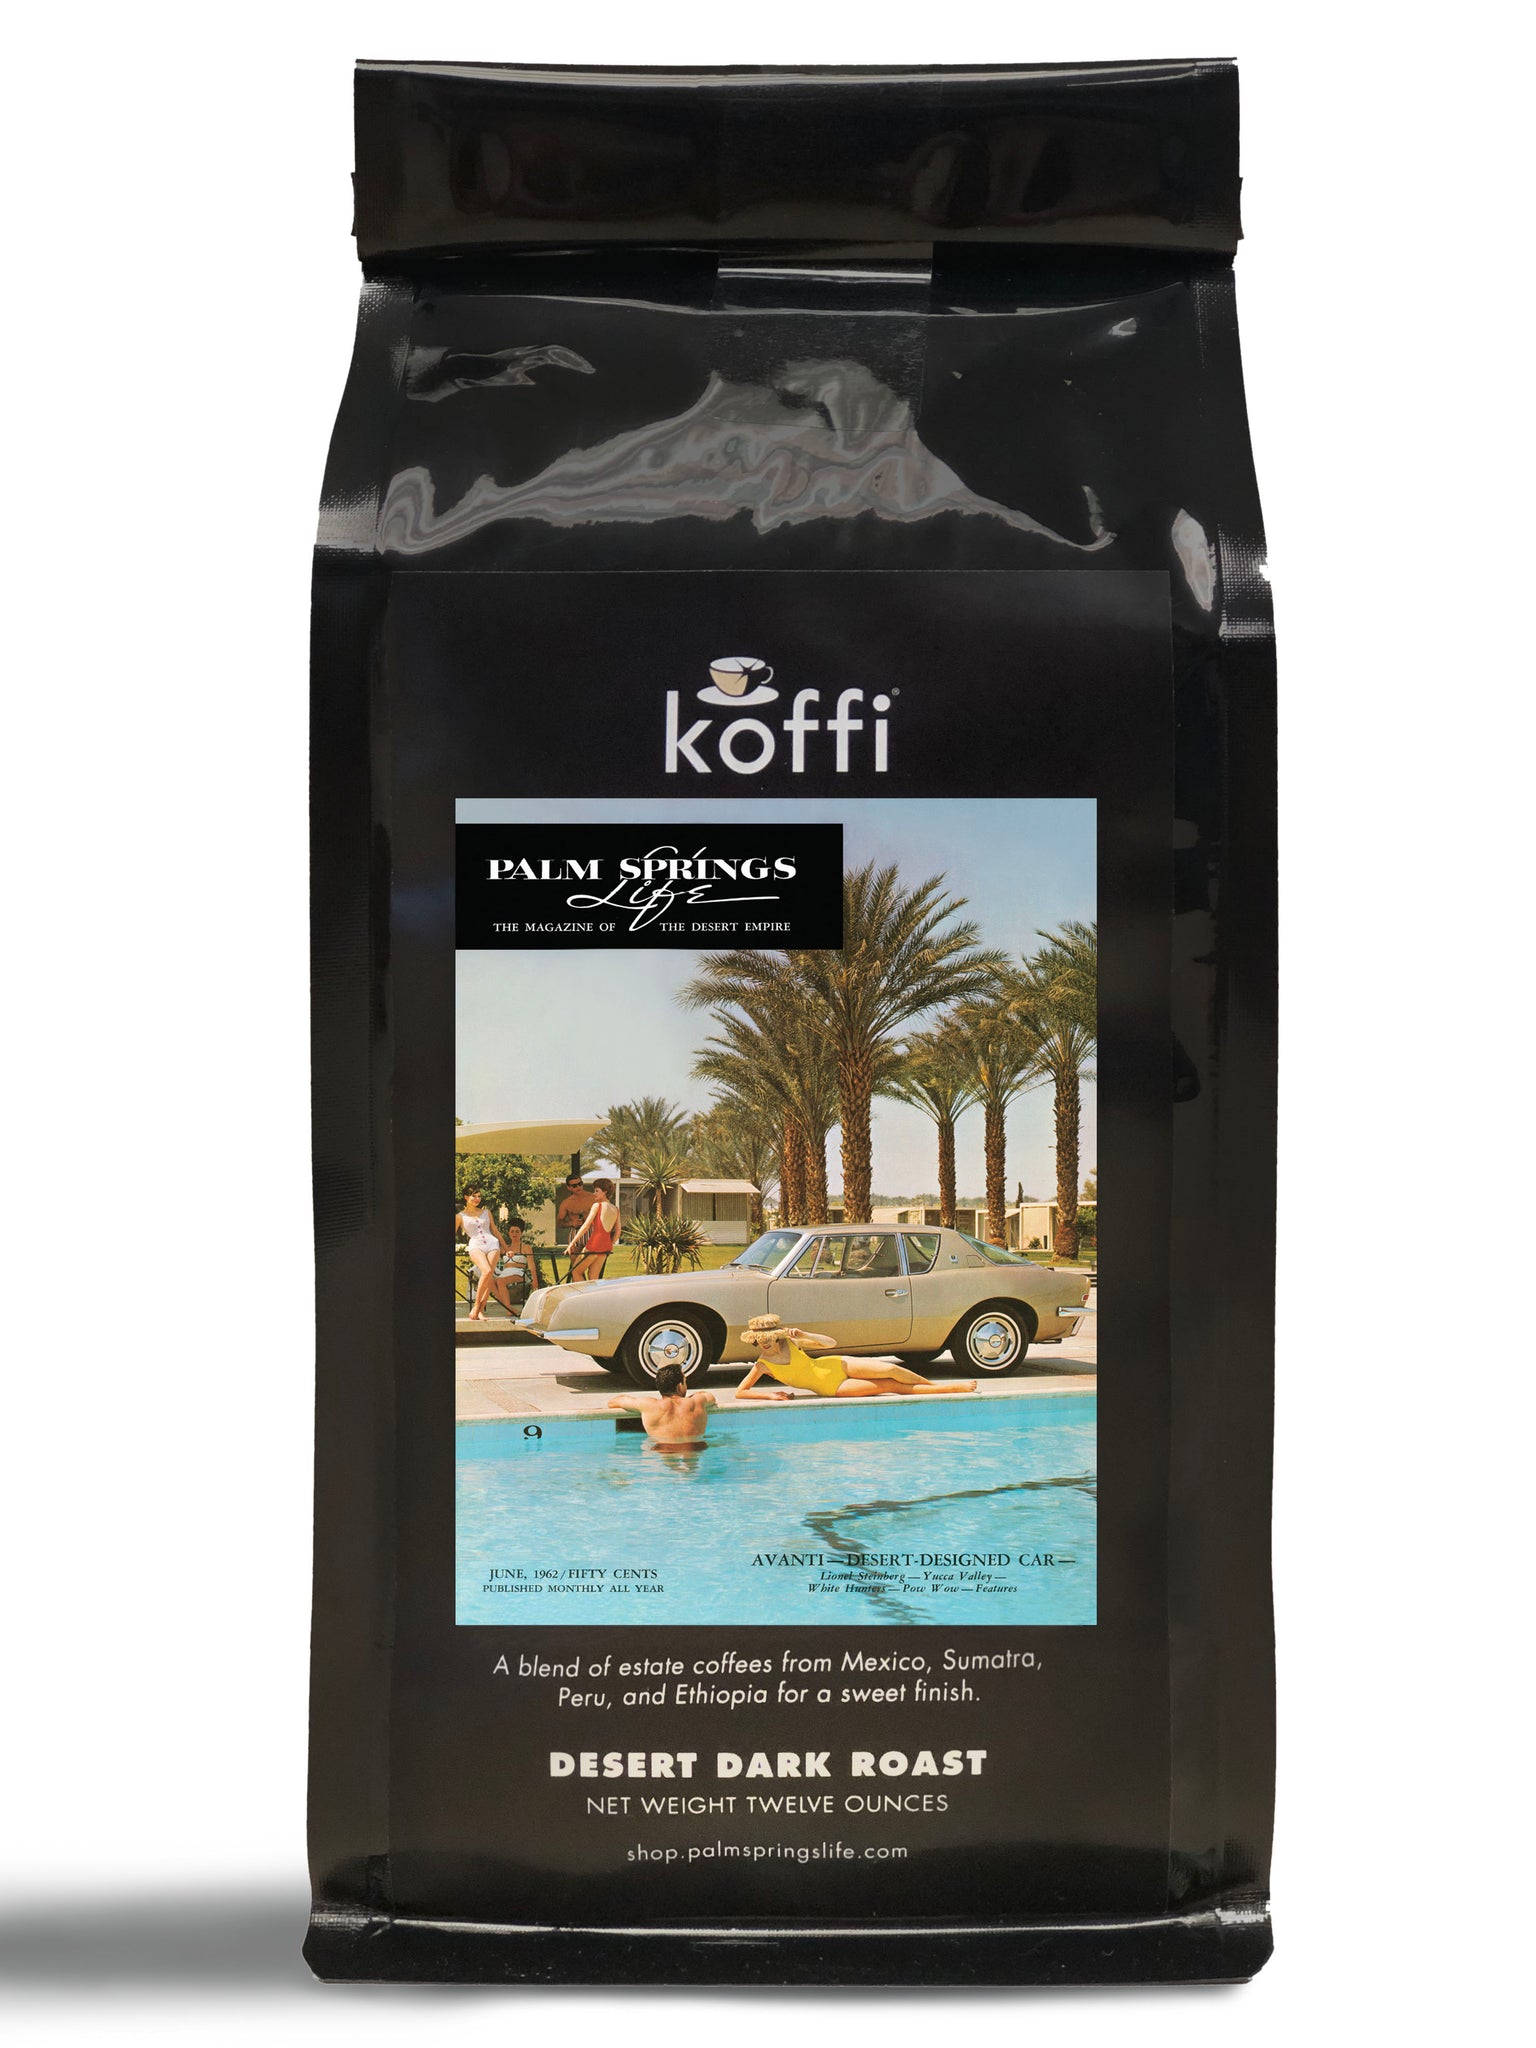 Coffee from Koffi and Palm Springs Life